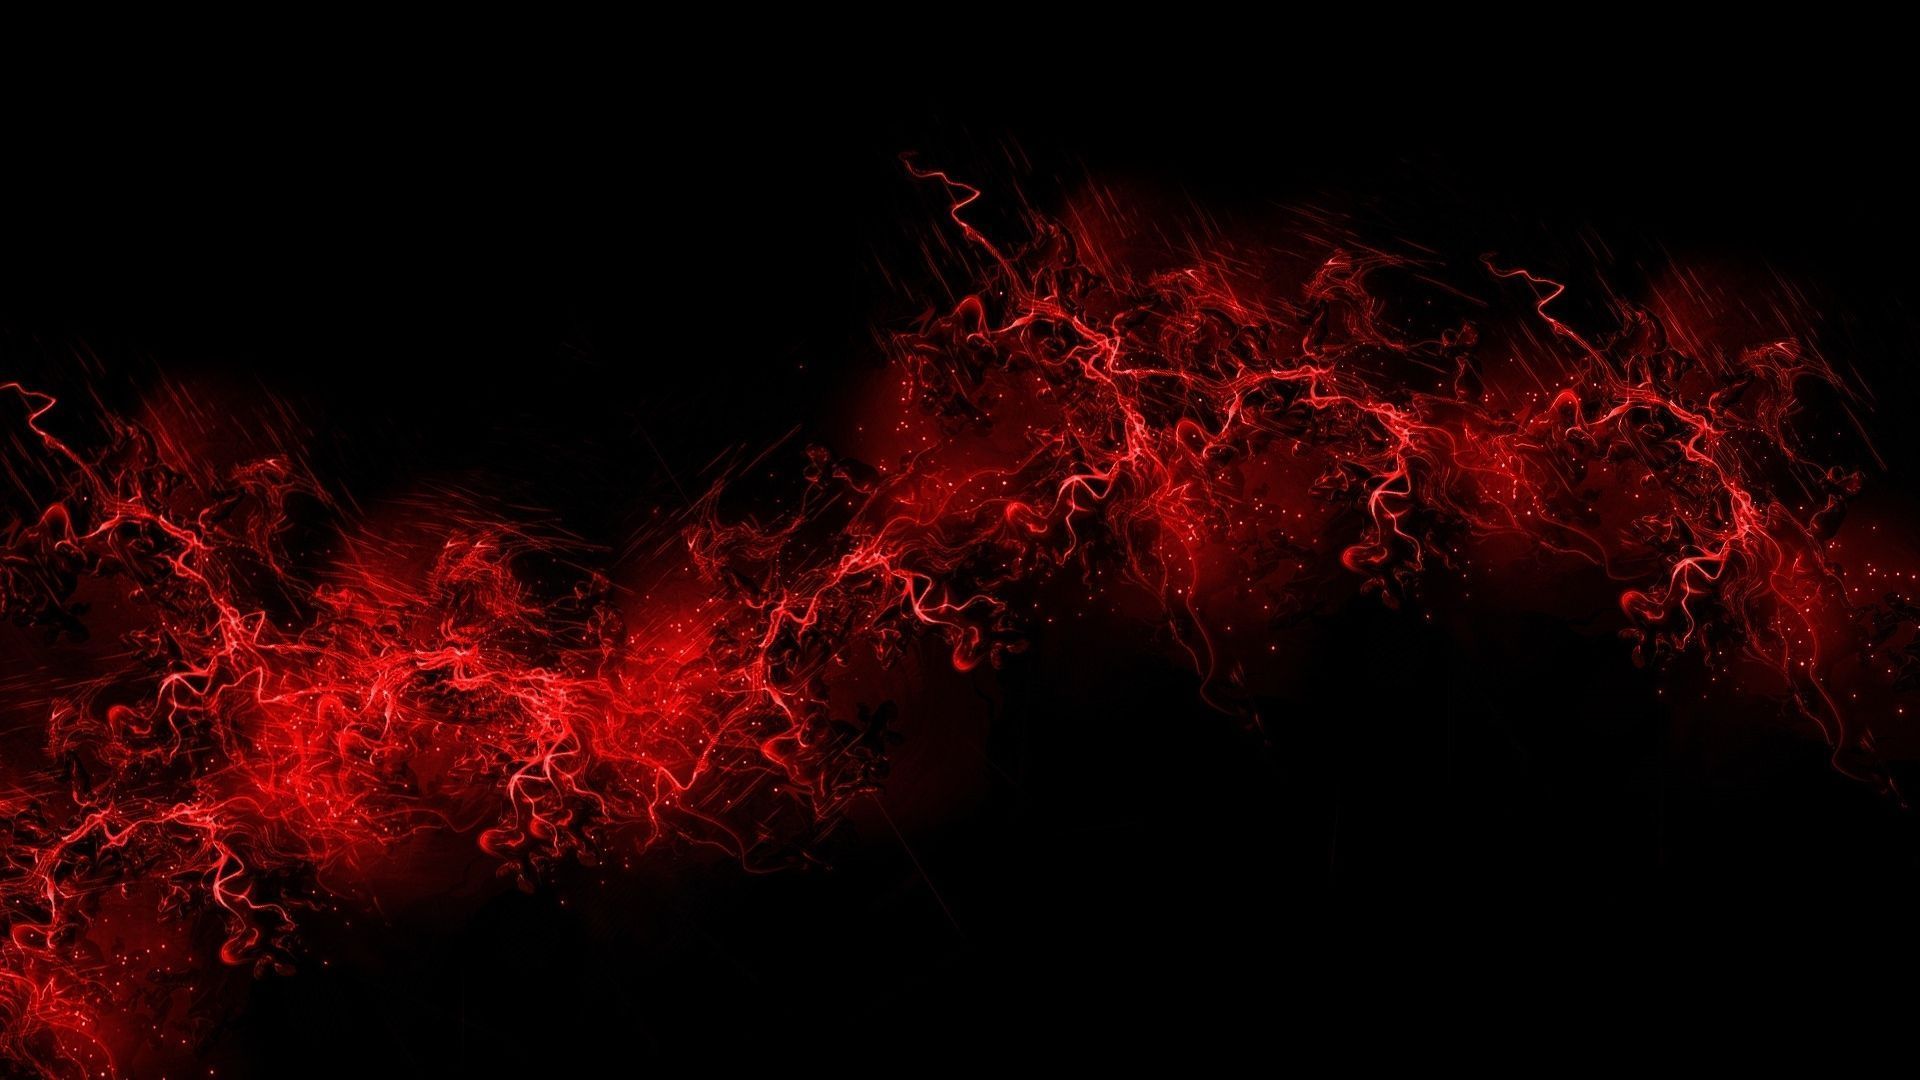 A red and black background with some lightning - Light red, dark red, red, neon red, flames